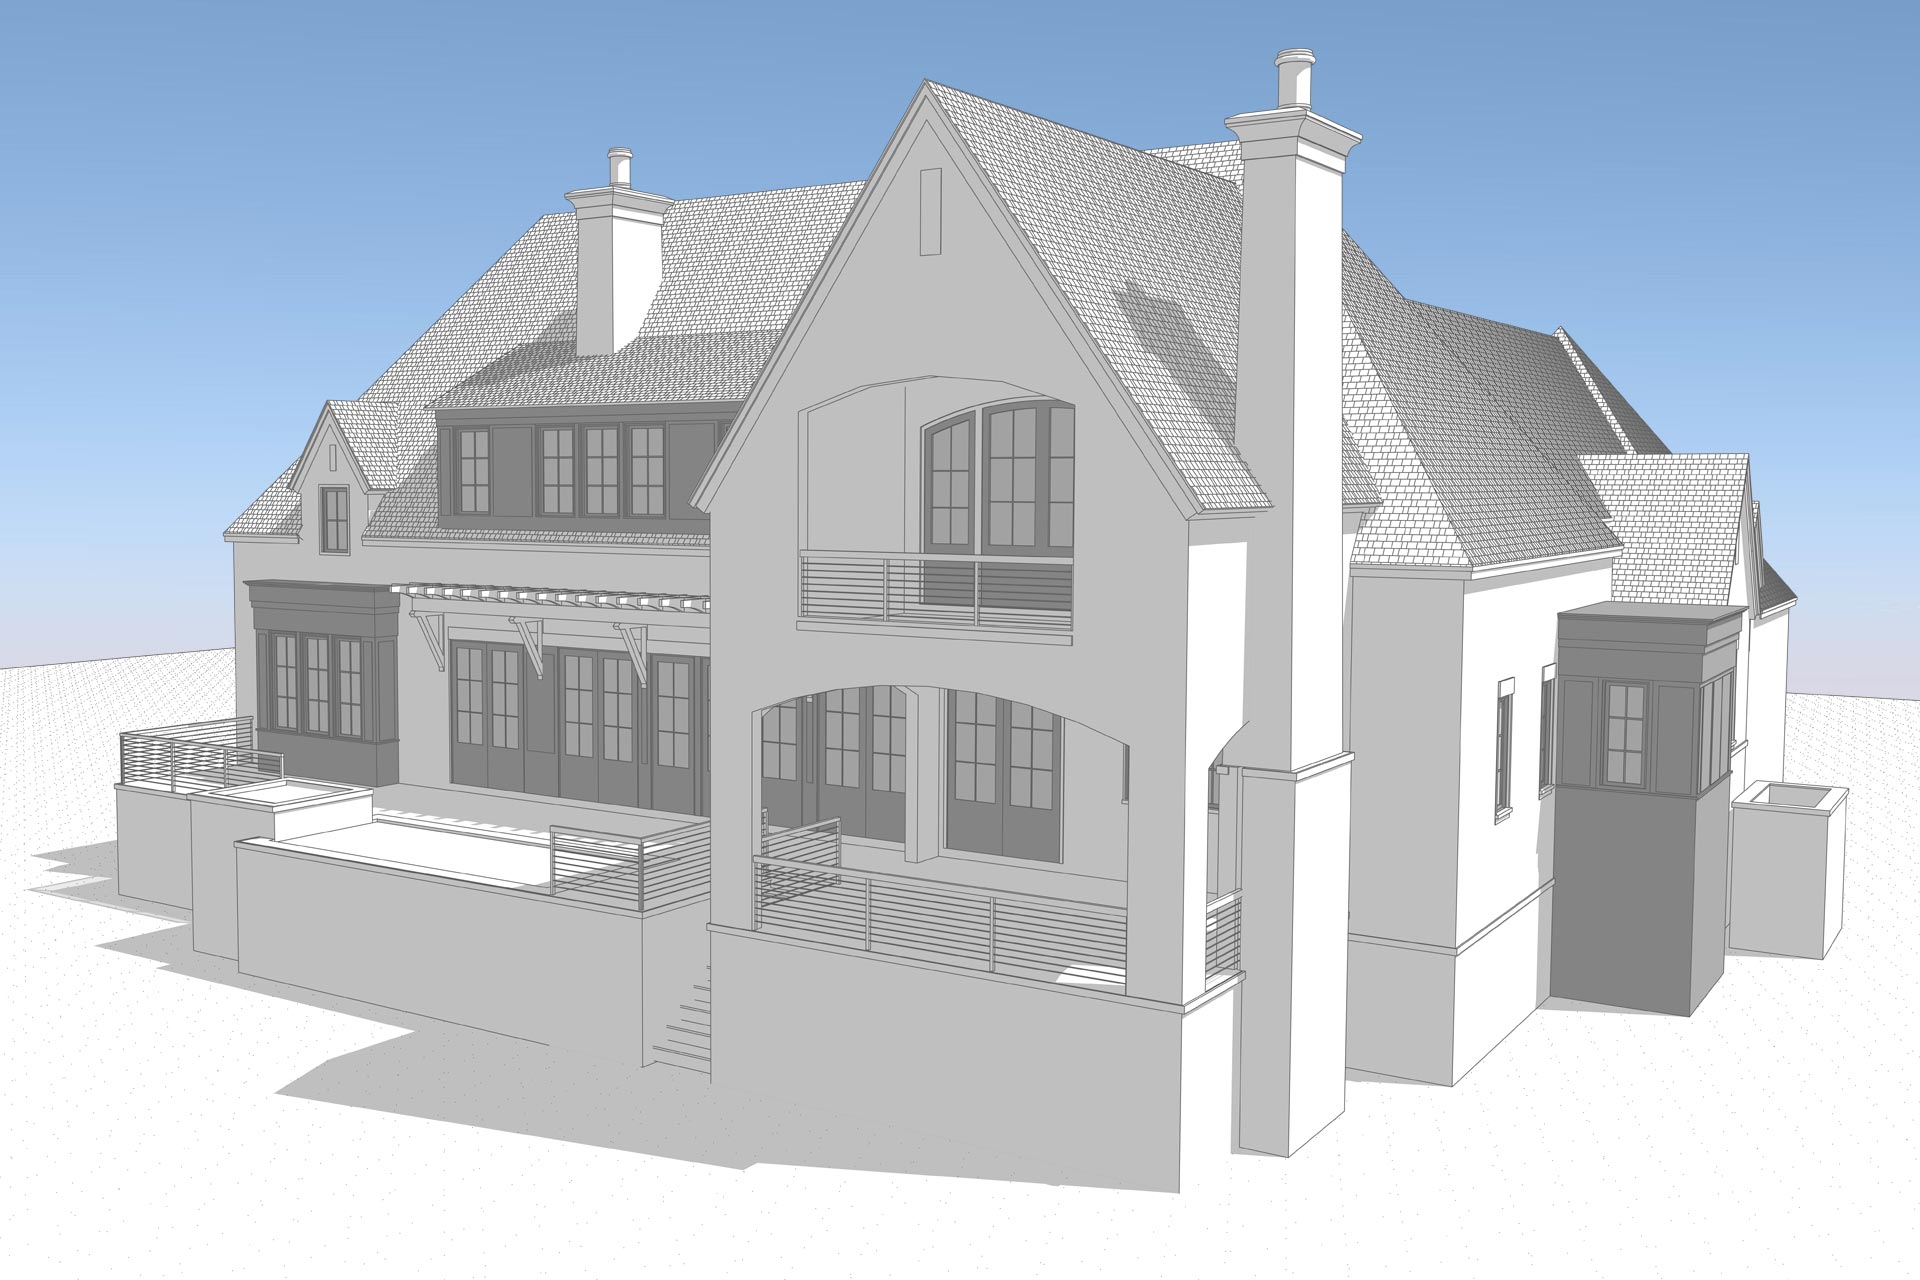 Design rendering for classic, European-inspired coastal home in Cassique on Kiawah